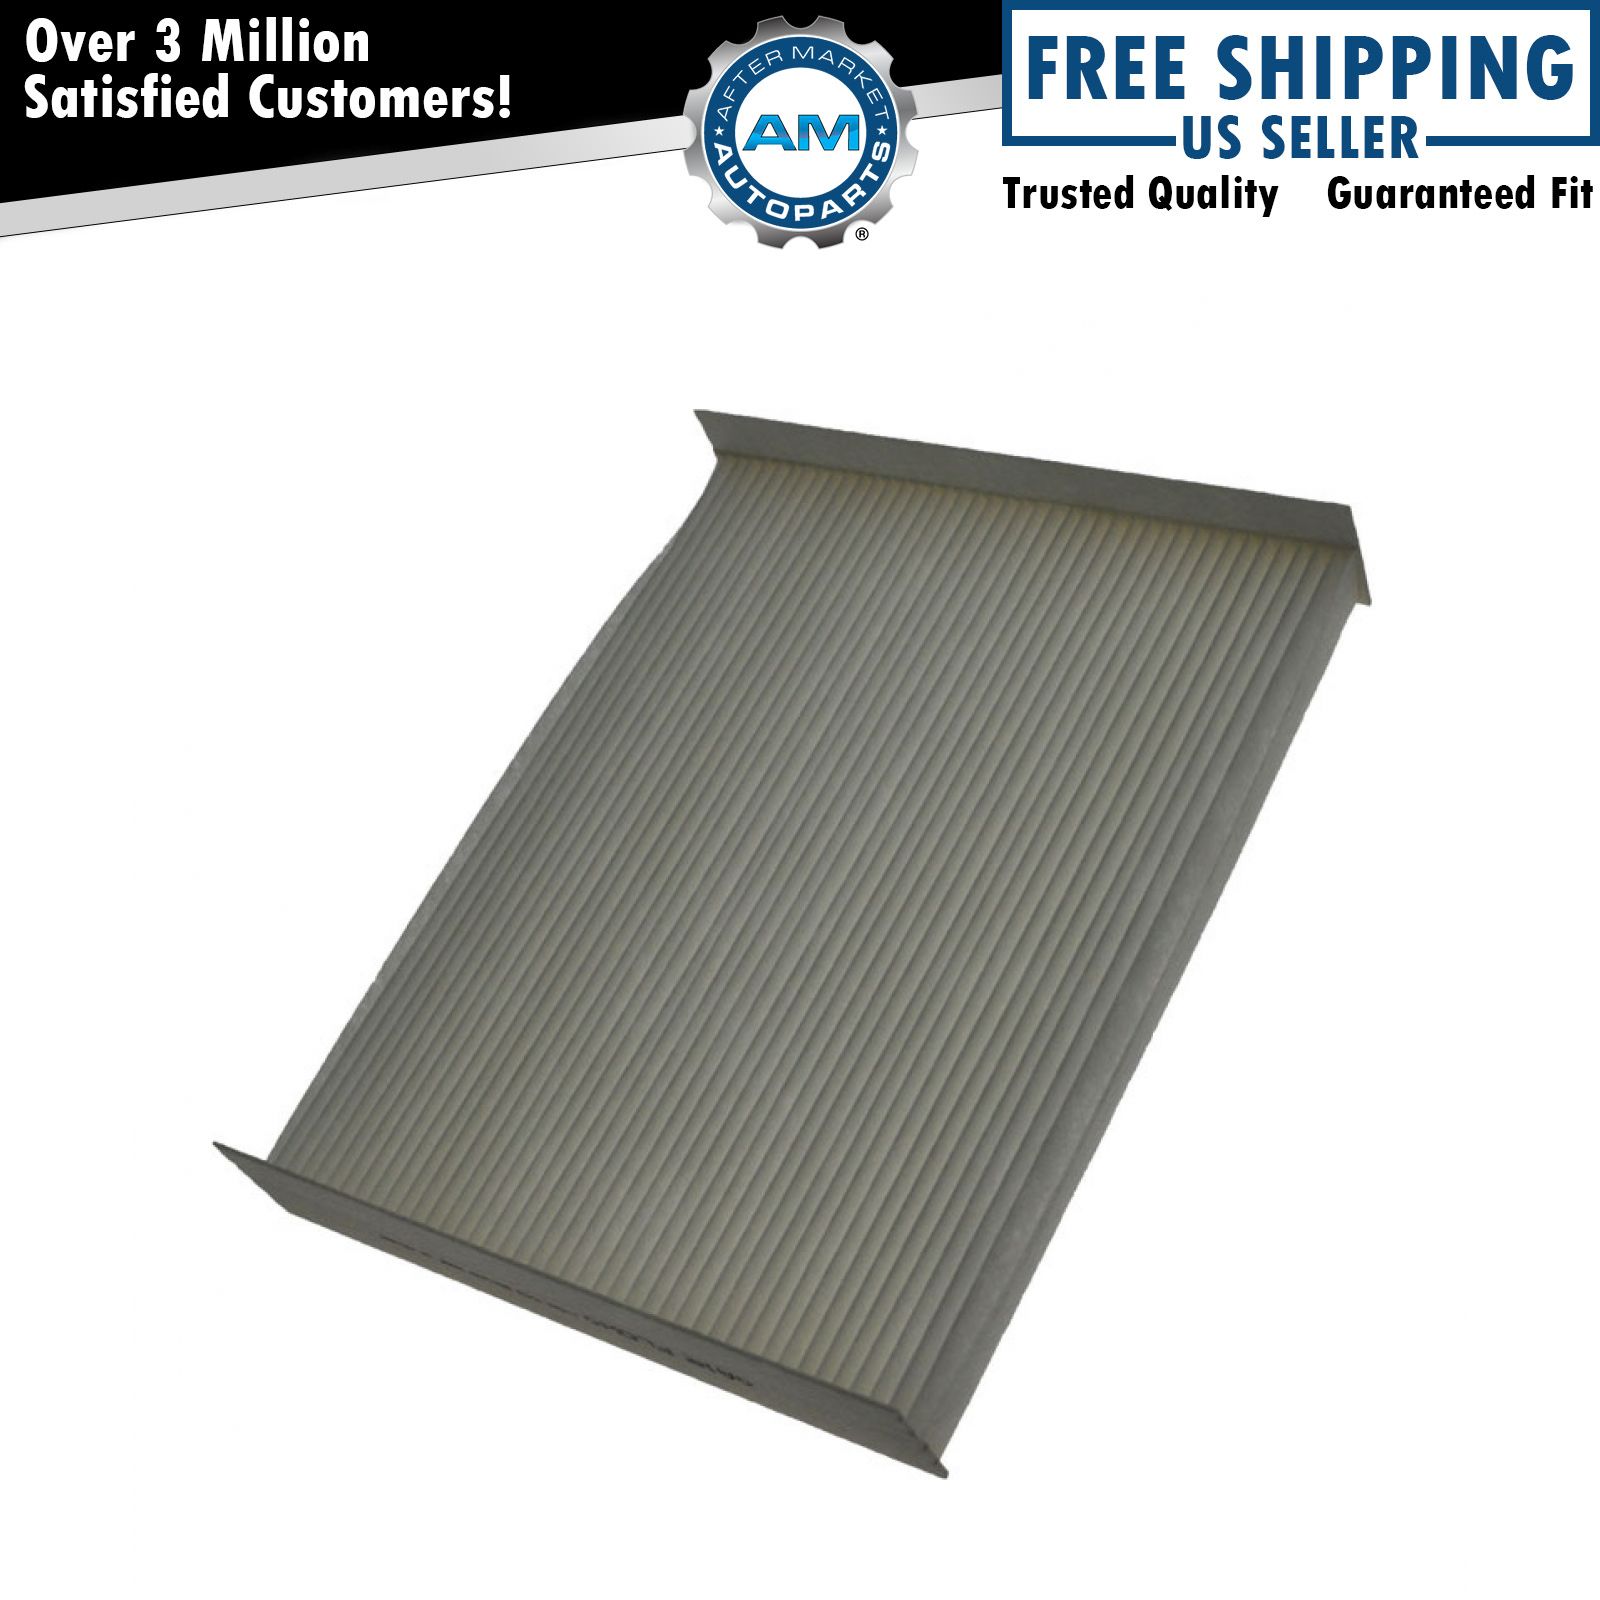 Paper Cabin Air Filter for 10-12 Ford Fusion Lincoln MKZ Mercury Milan Hybrid | eBay 2010 Ford Fusion Cabin Air Filter Part Number